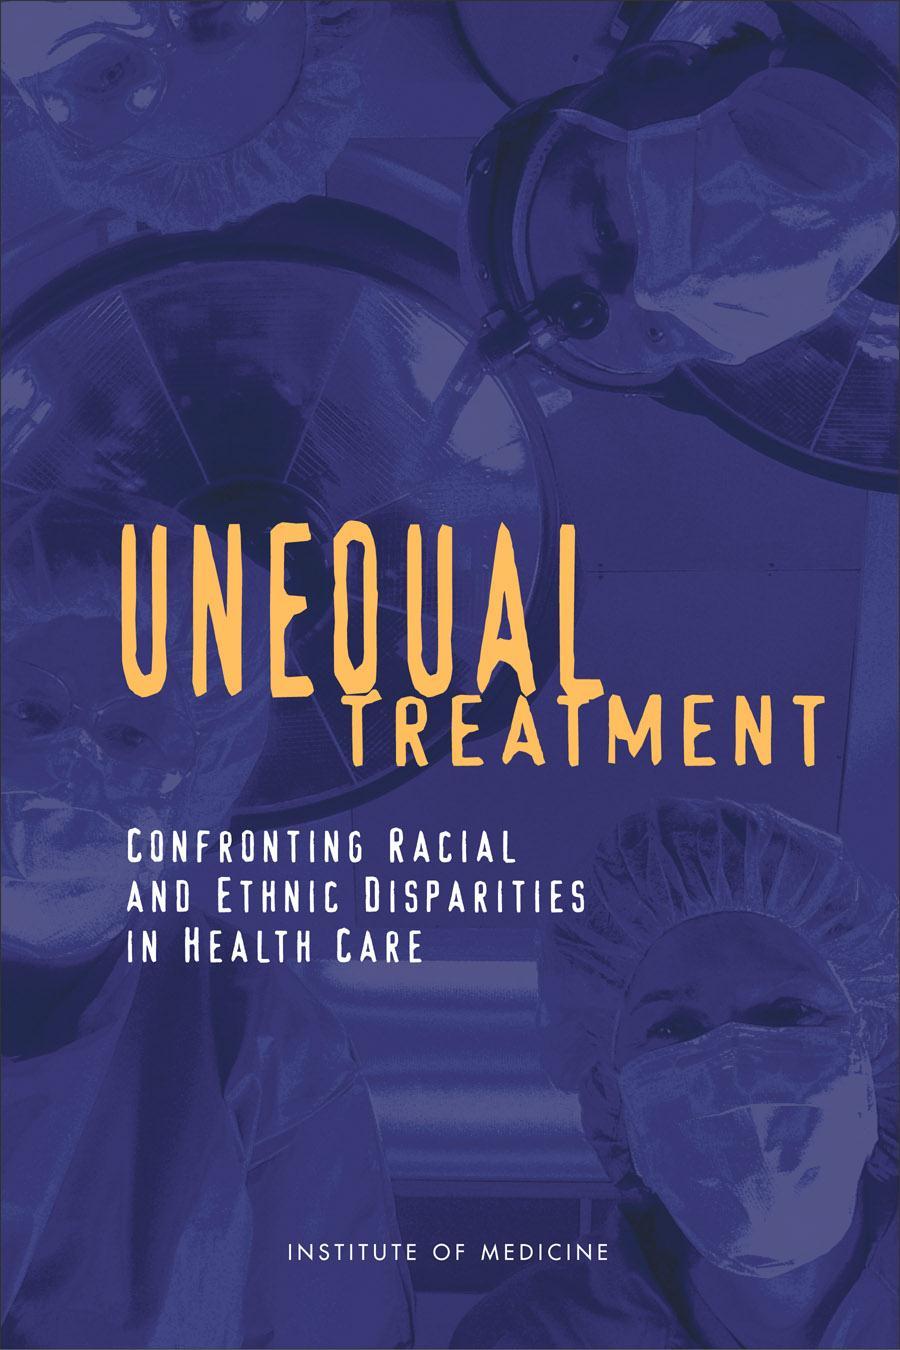 Disparities in Health Care 2002 Racial/Ethnic disparities found across a wide range of health care settings, disease areas, and clinical